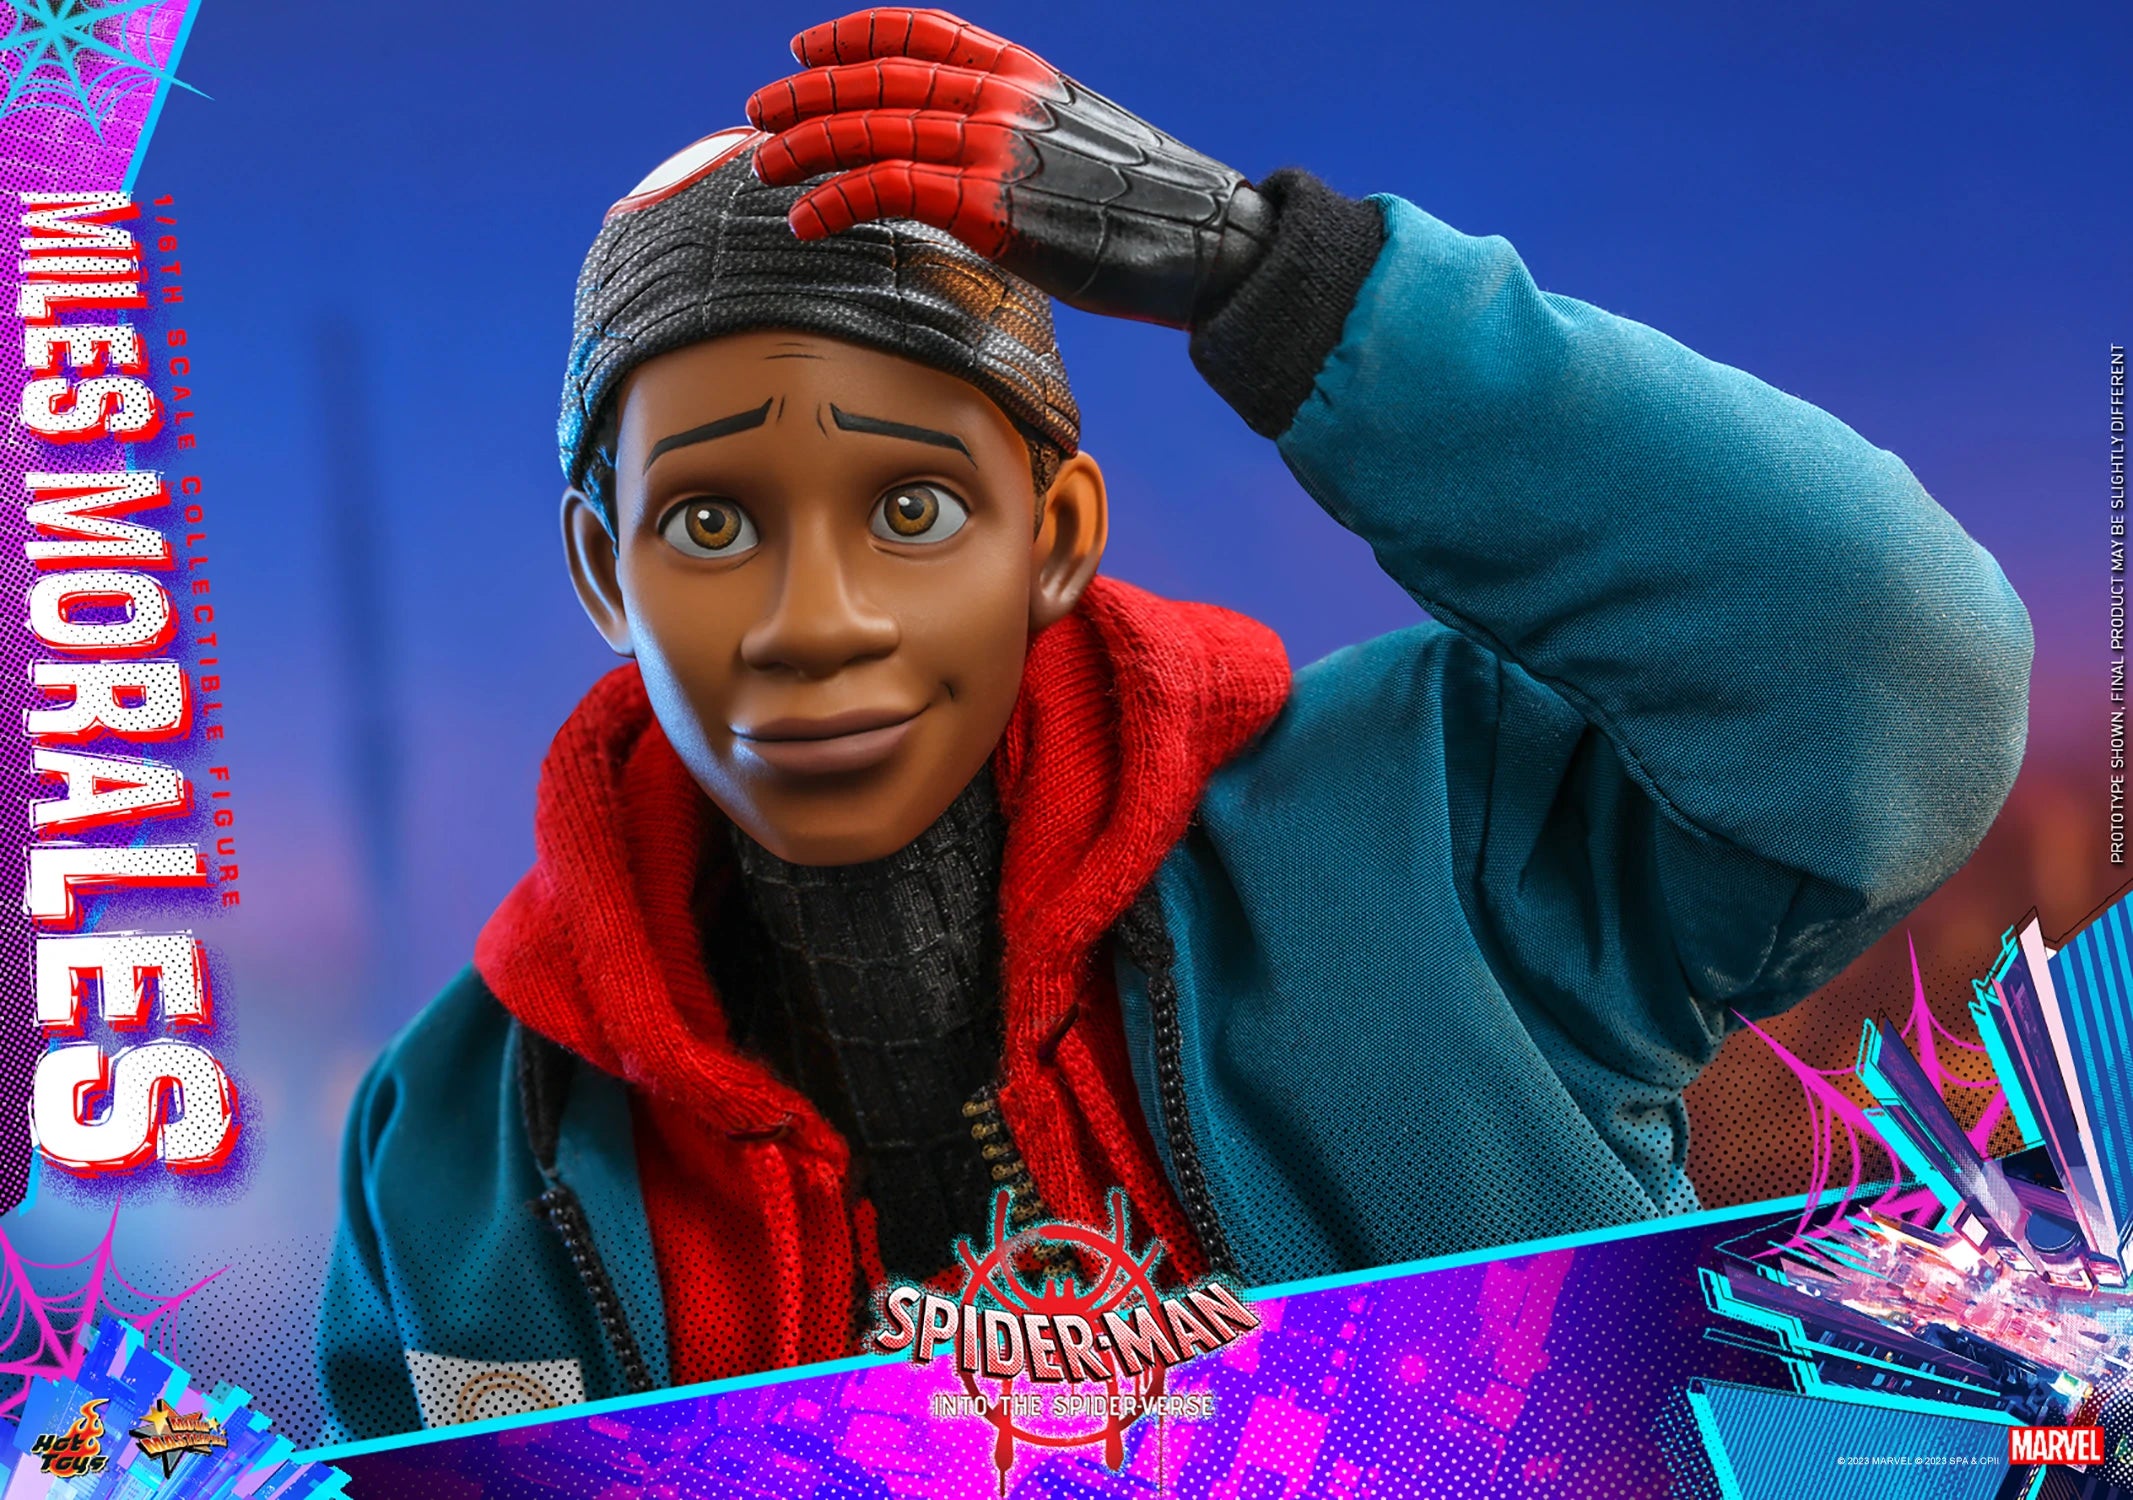 MILES MORALES Sixth Scale Figure by Hot Toys